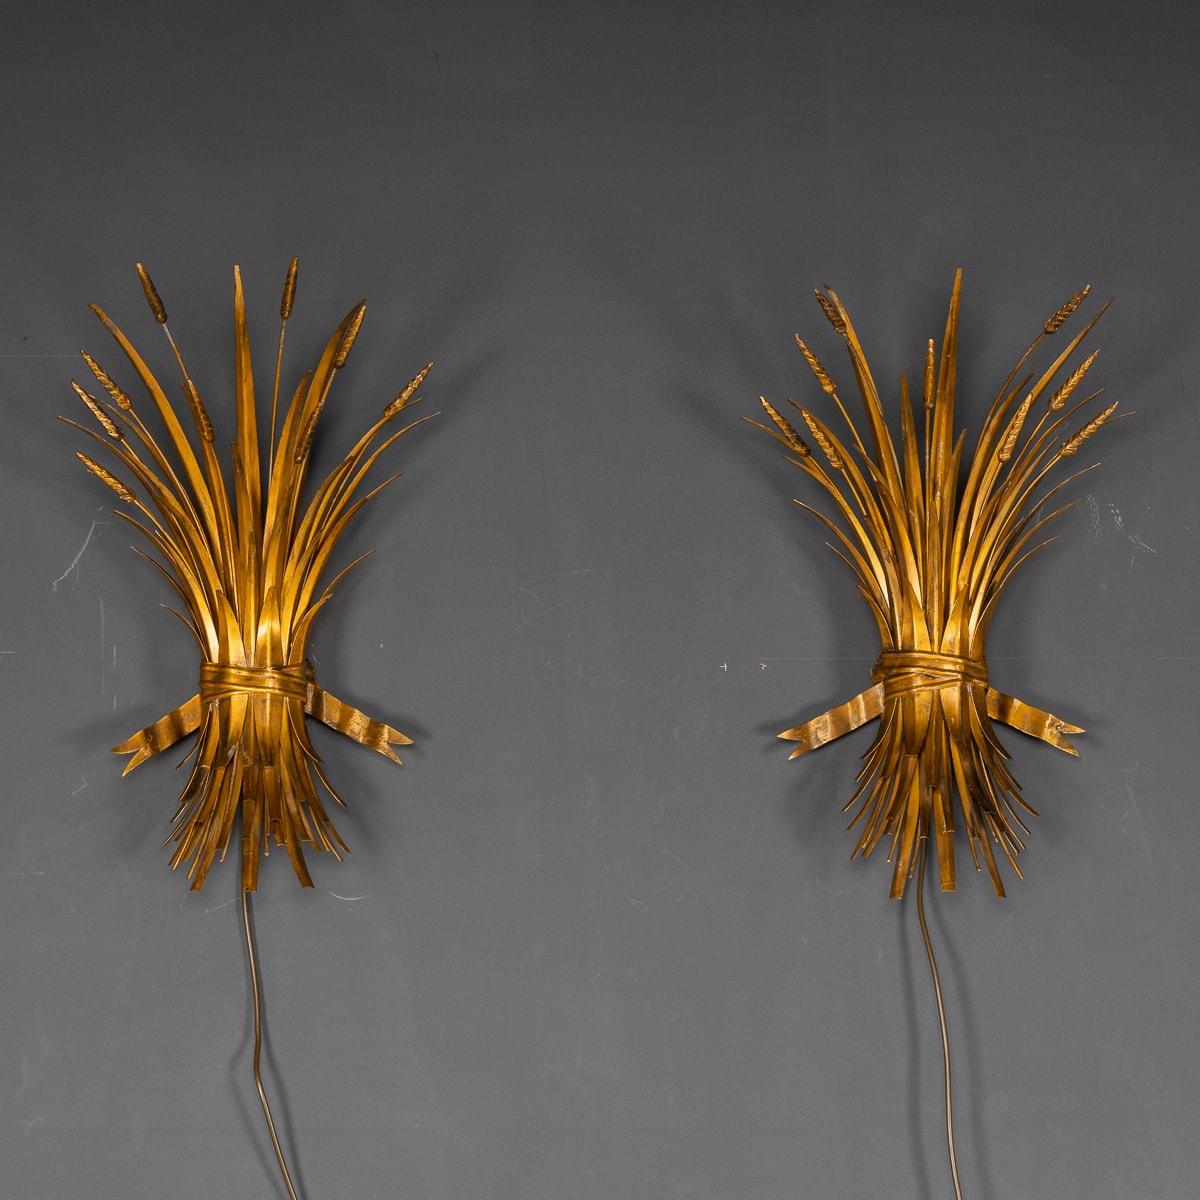 A pair of Italian gilded metal wall lights in the form of a wheatsheaf, c.1970's. Once lit they creates a rich yet soft light source, a spectacular addition to any interior whether modern or traditional.

CONDITION
In good condition - wear and